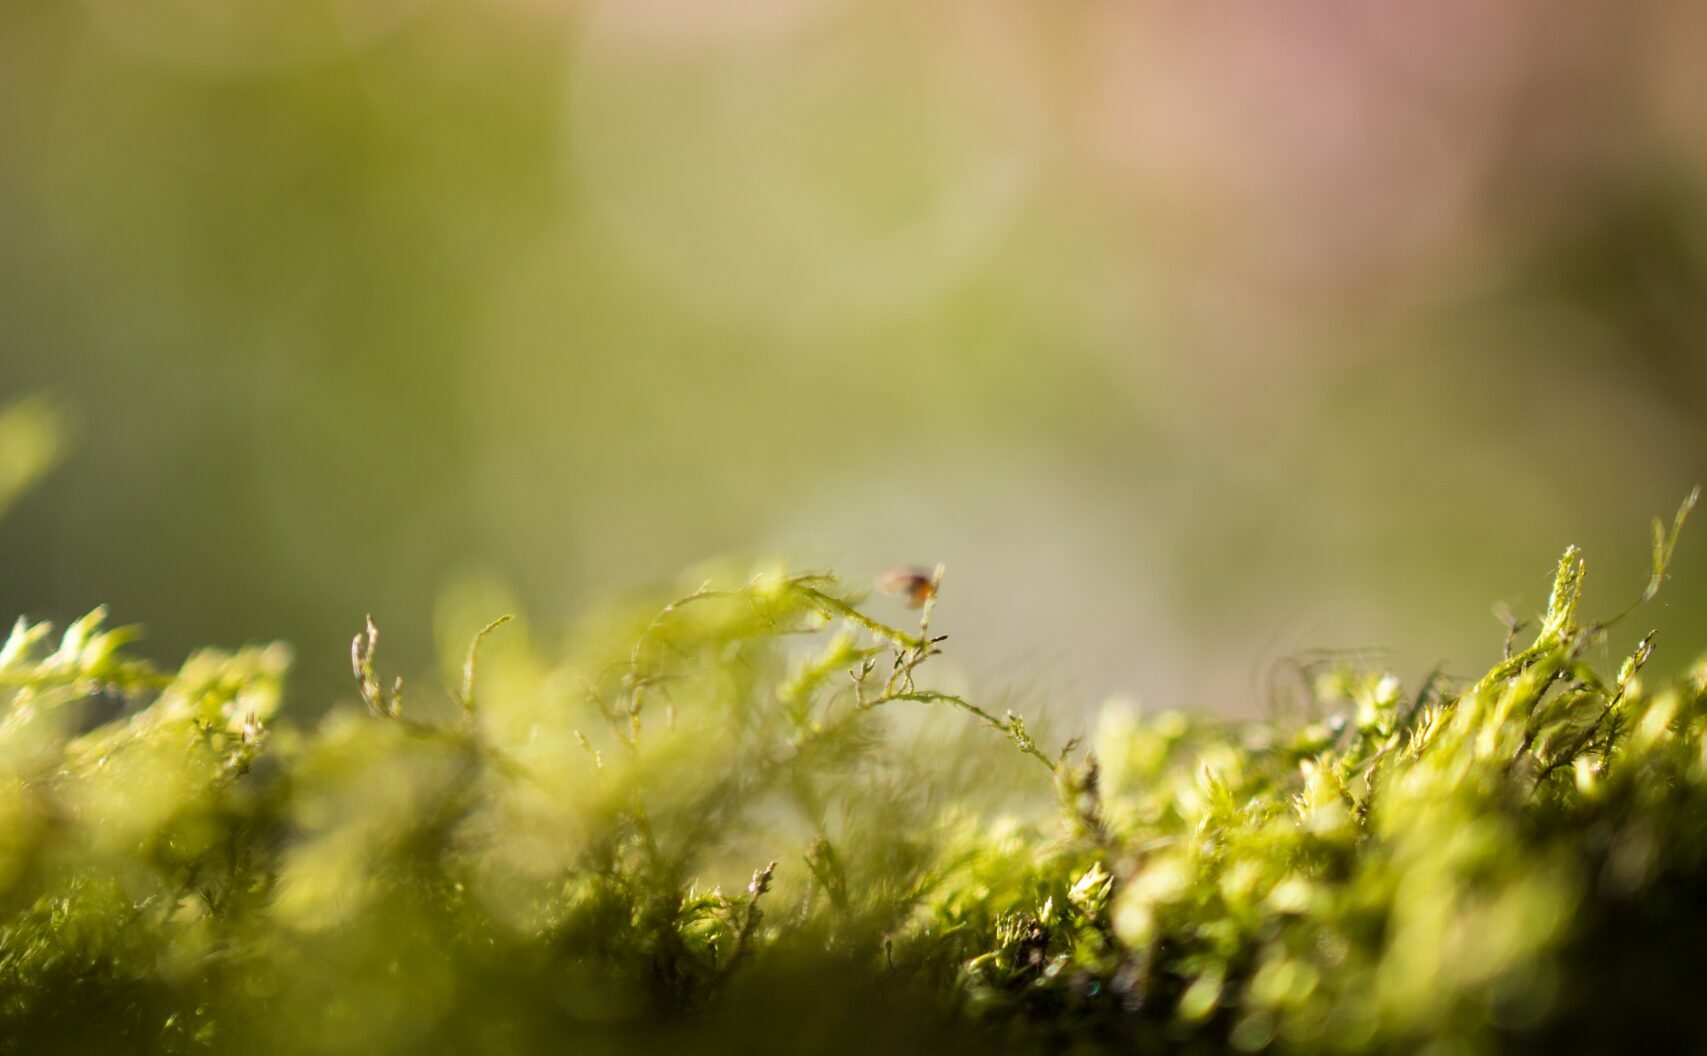 Moss grows in difficult conditions